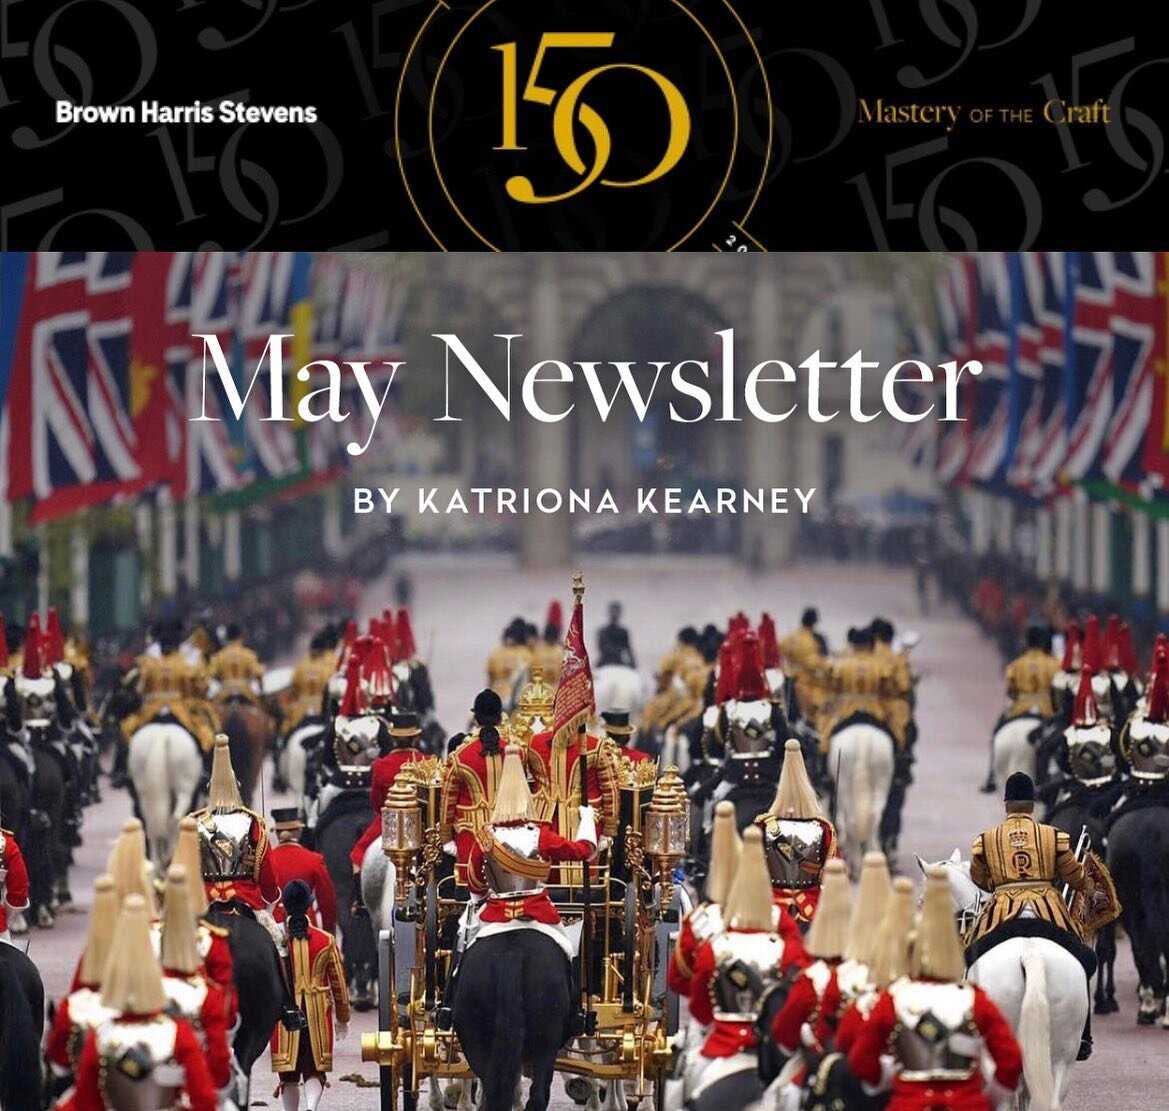 May&rsquo;s newsletter is out! If you want to hear my musings on the market, inspirations from Brooklyn and Beyond and listing updates then DM me to get on my distribution list!

#newsletter #realestatebroker #bronwharrisstevens #bhsbklyn #brownstone